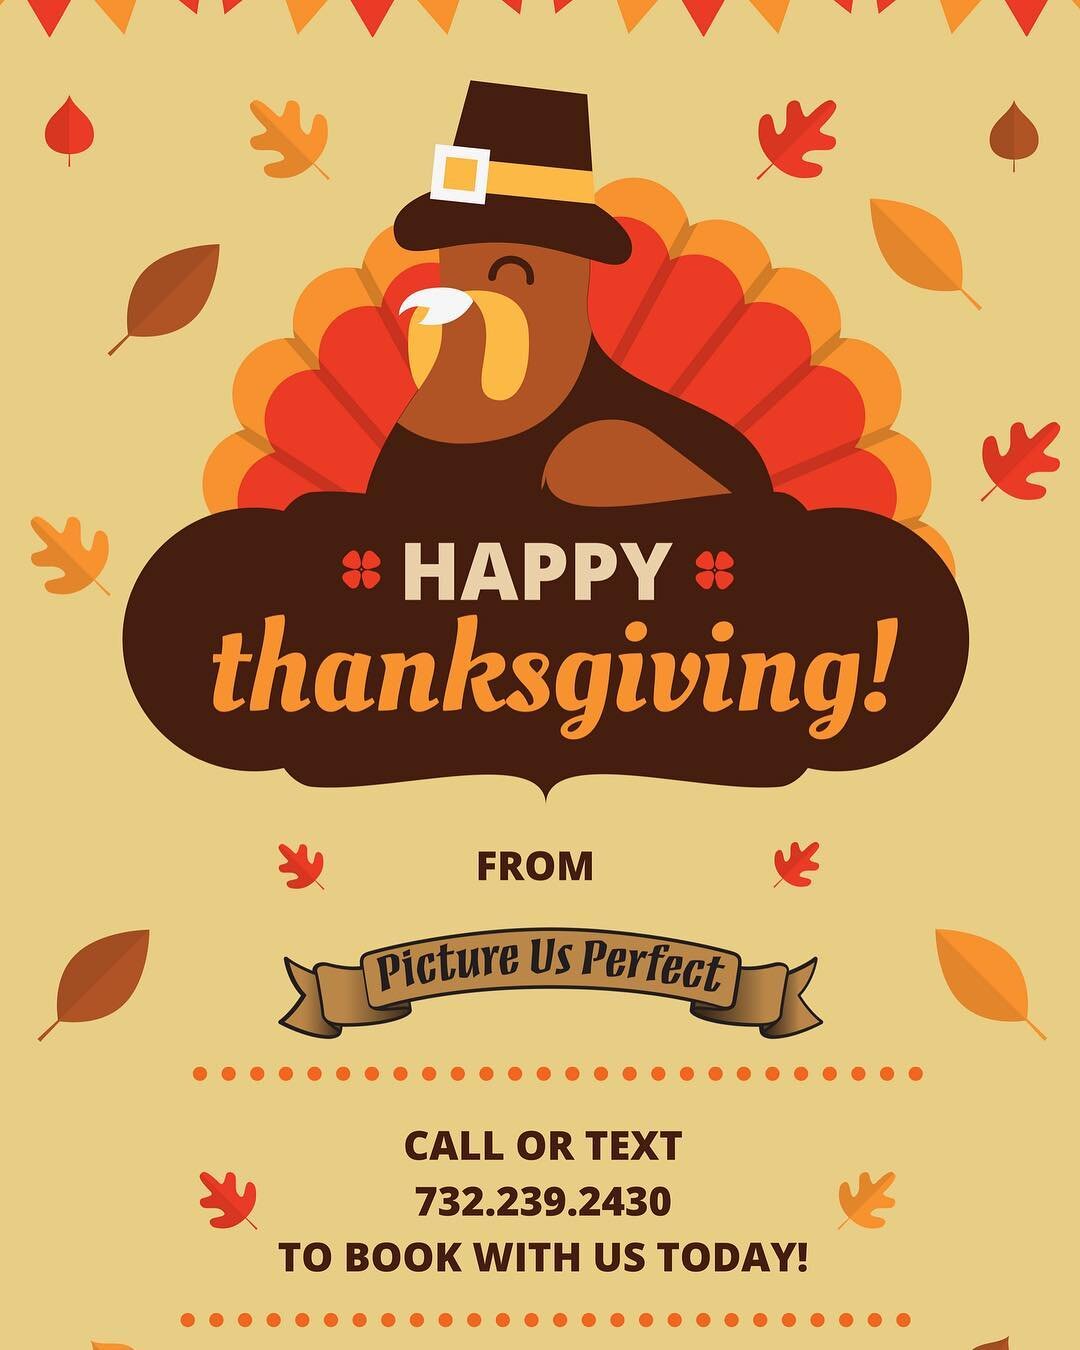 Happy Thanksgiving! #fall #thanksgiving #photography #photographynj #pictureusperfect #eventplanning #party